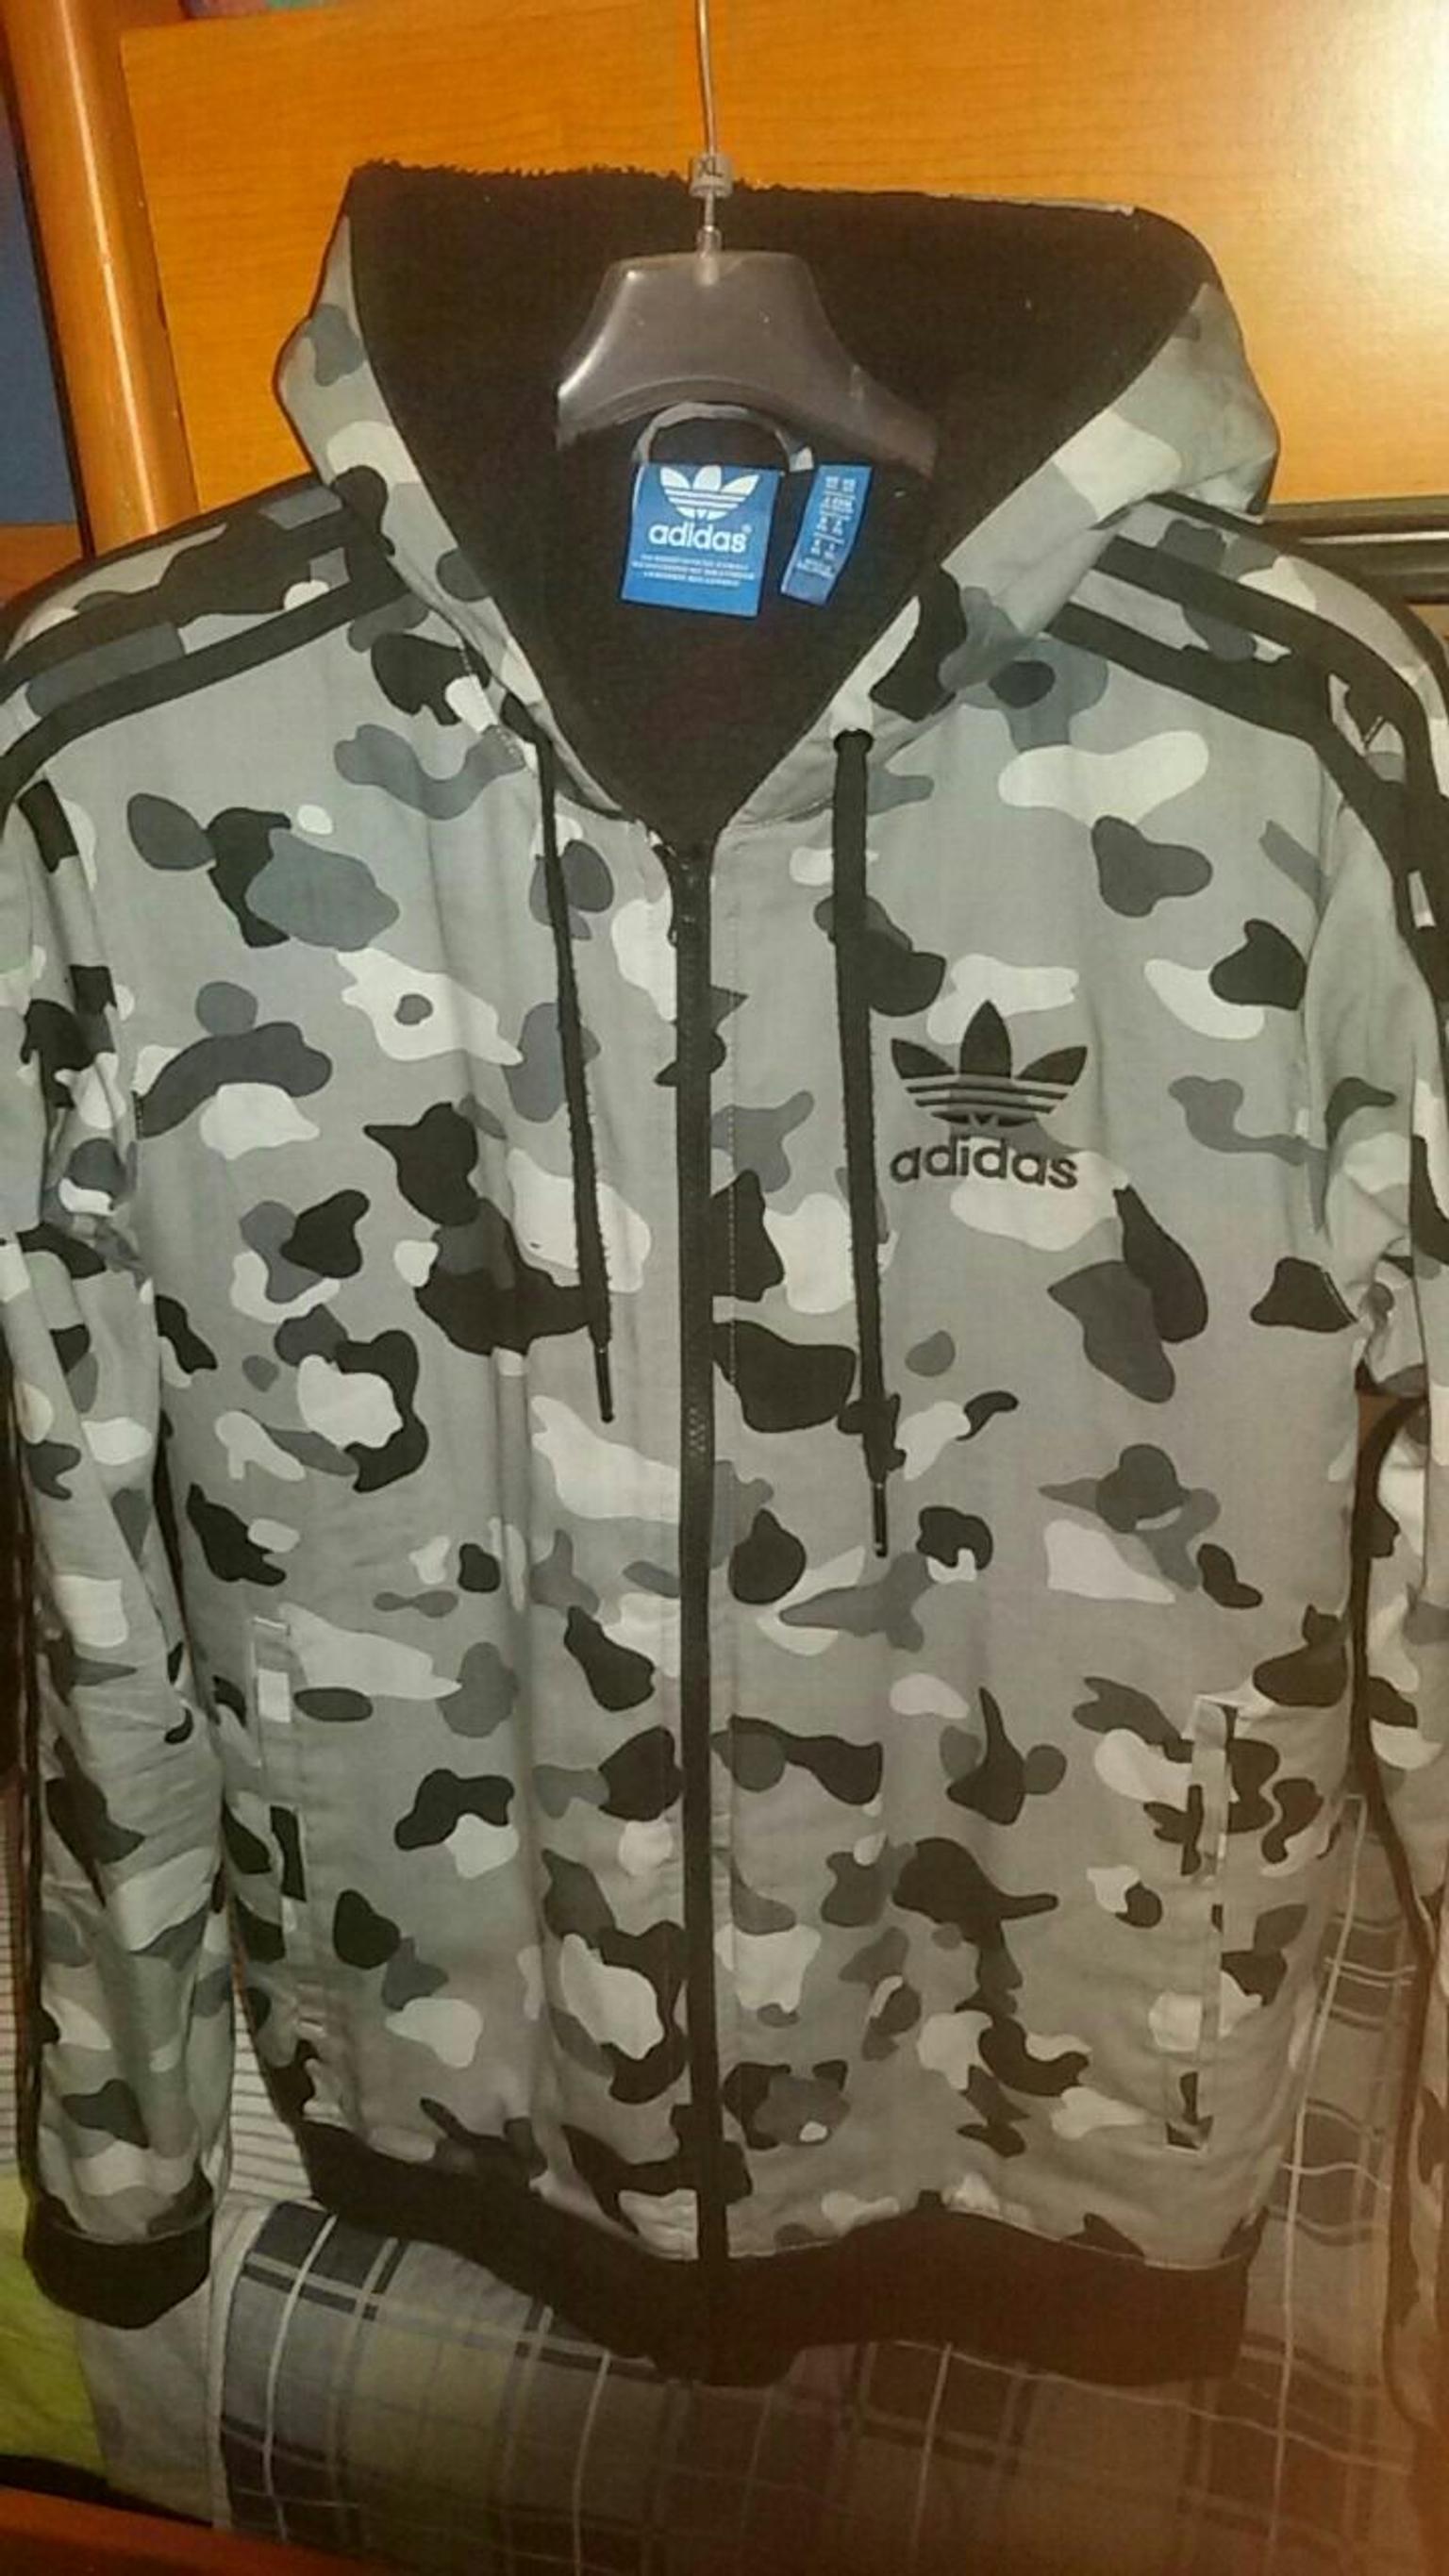 giacca adidas militare official 94f82 96cee